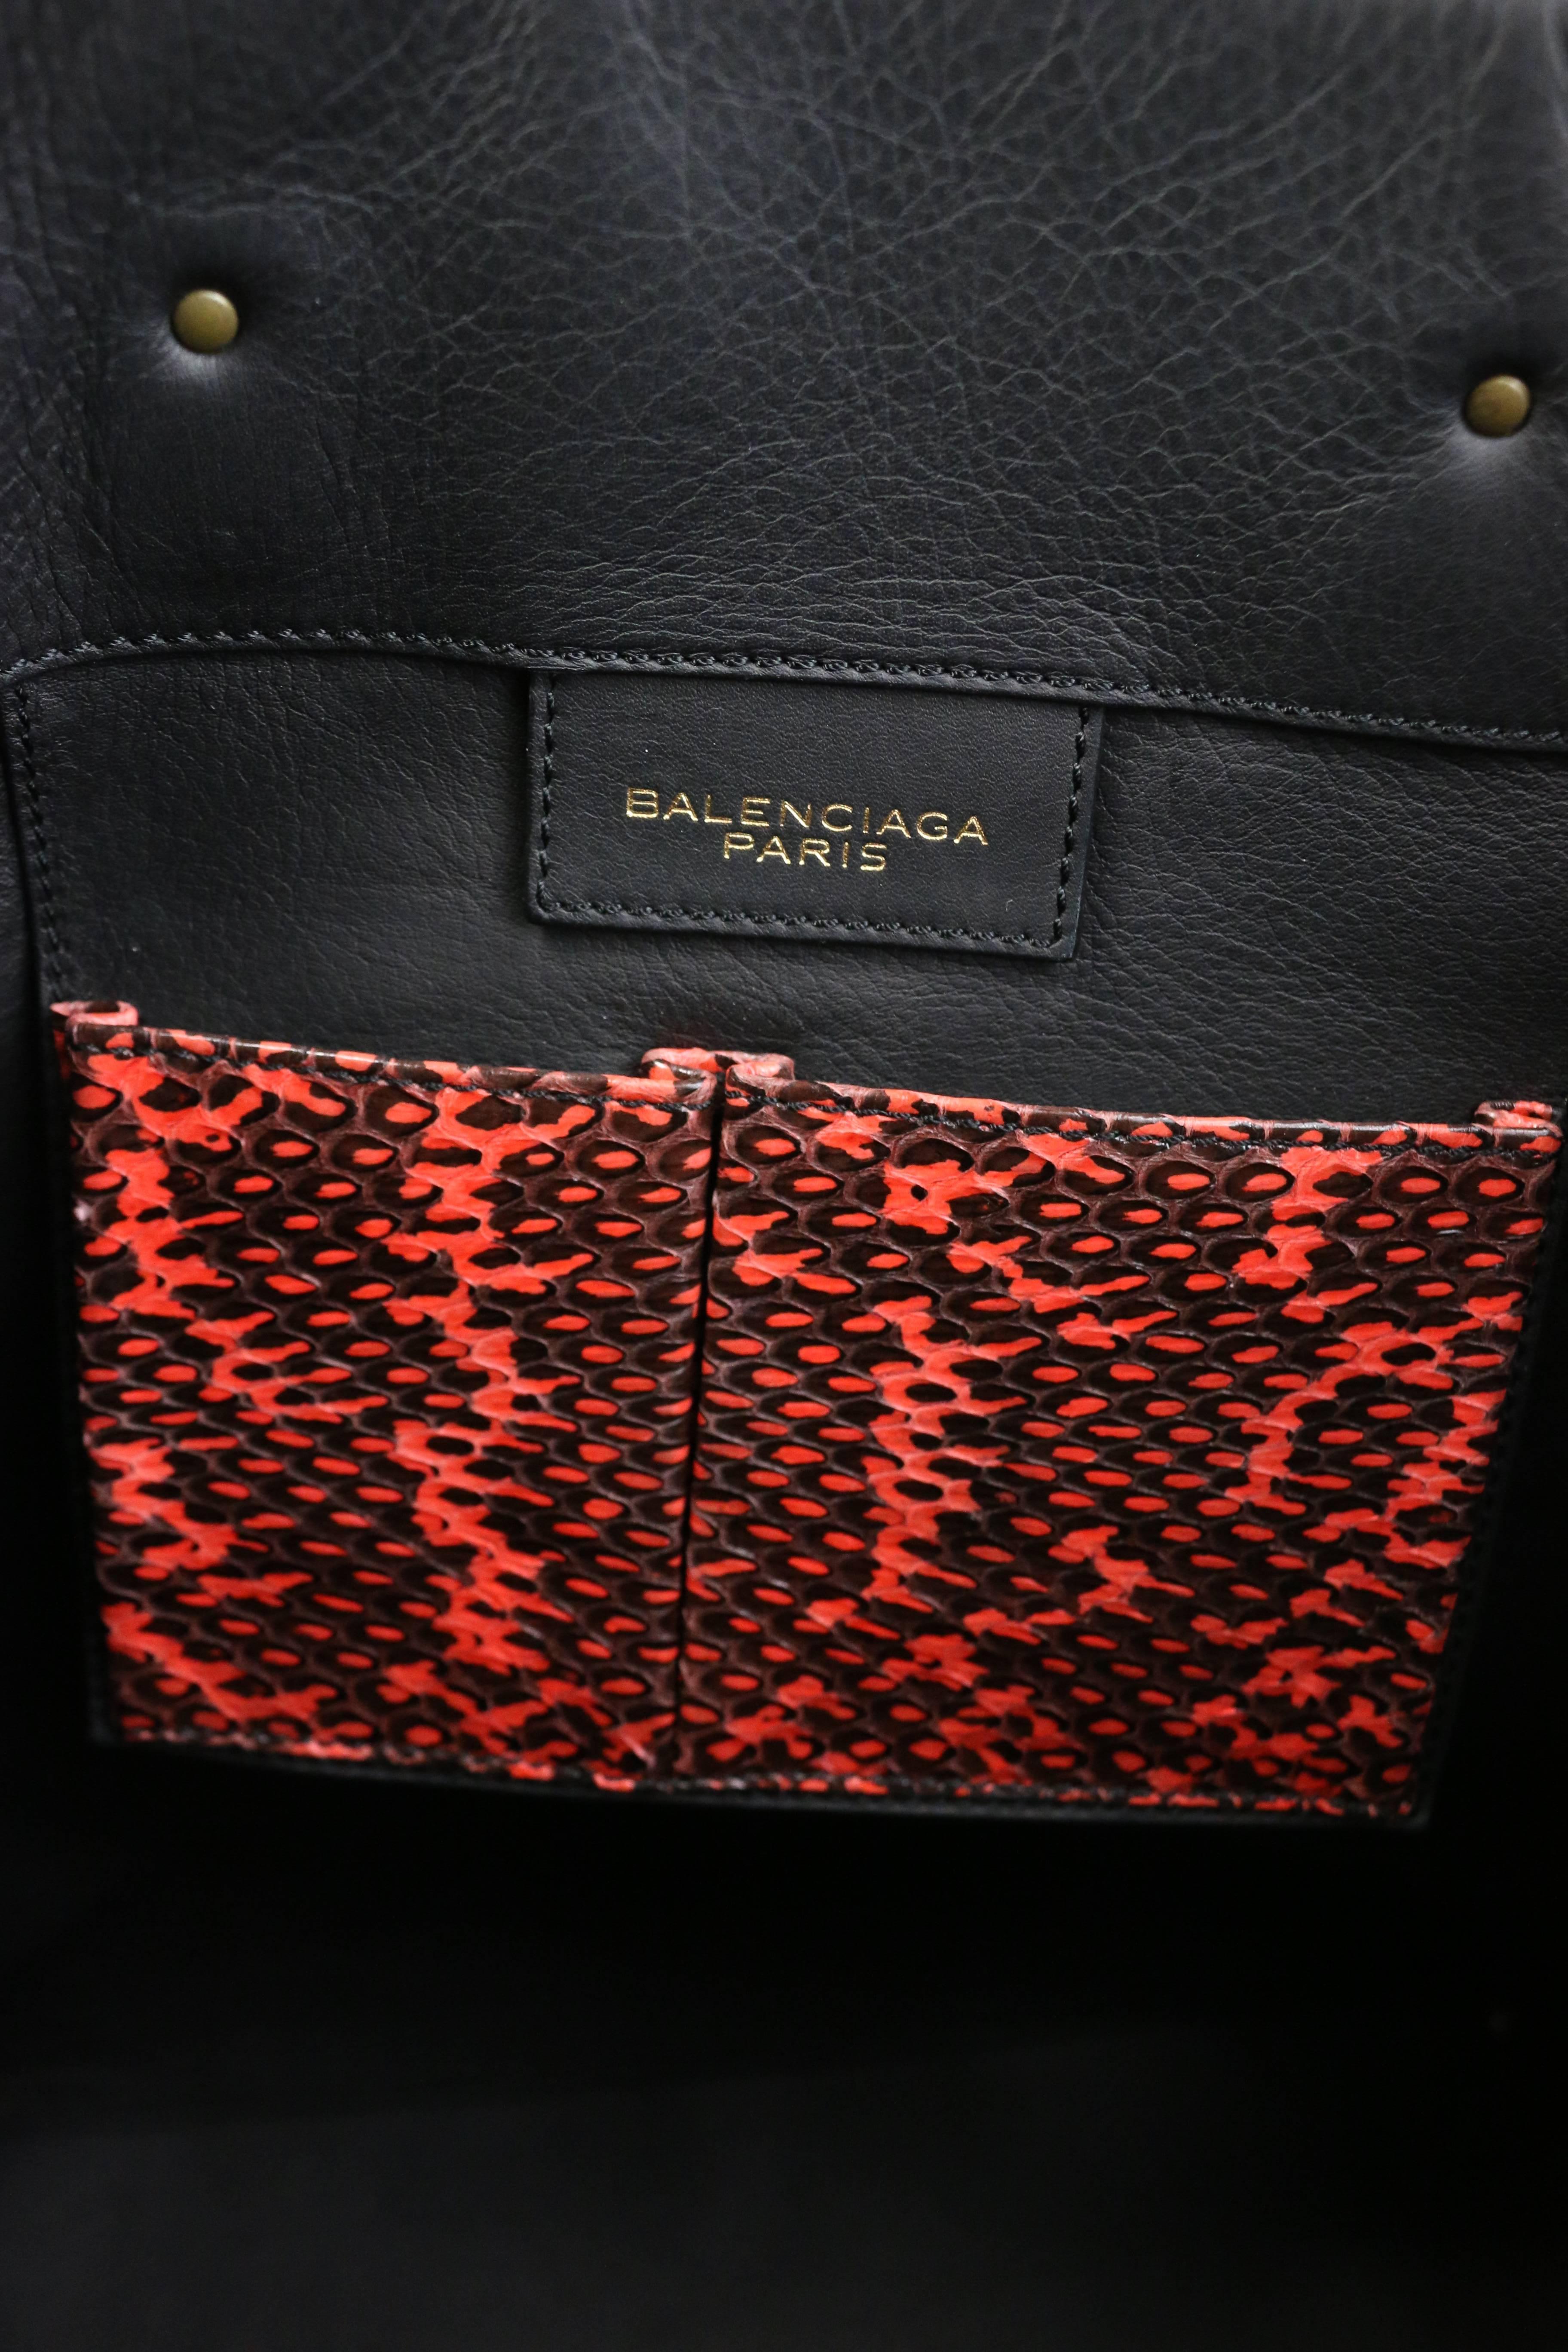 Brown Balenciaga Python Leather Faded black and Coral Paper Tote Bag